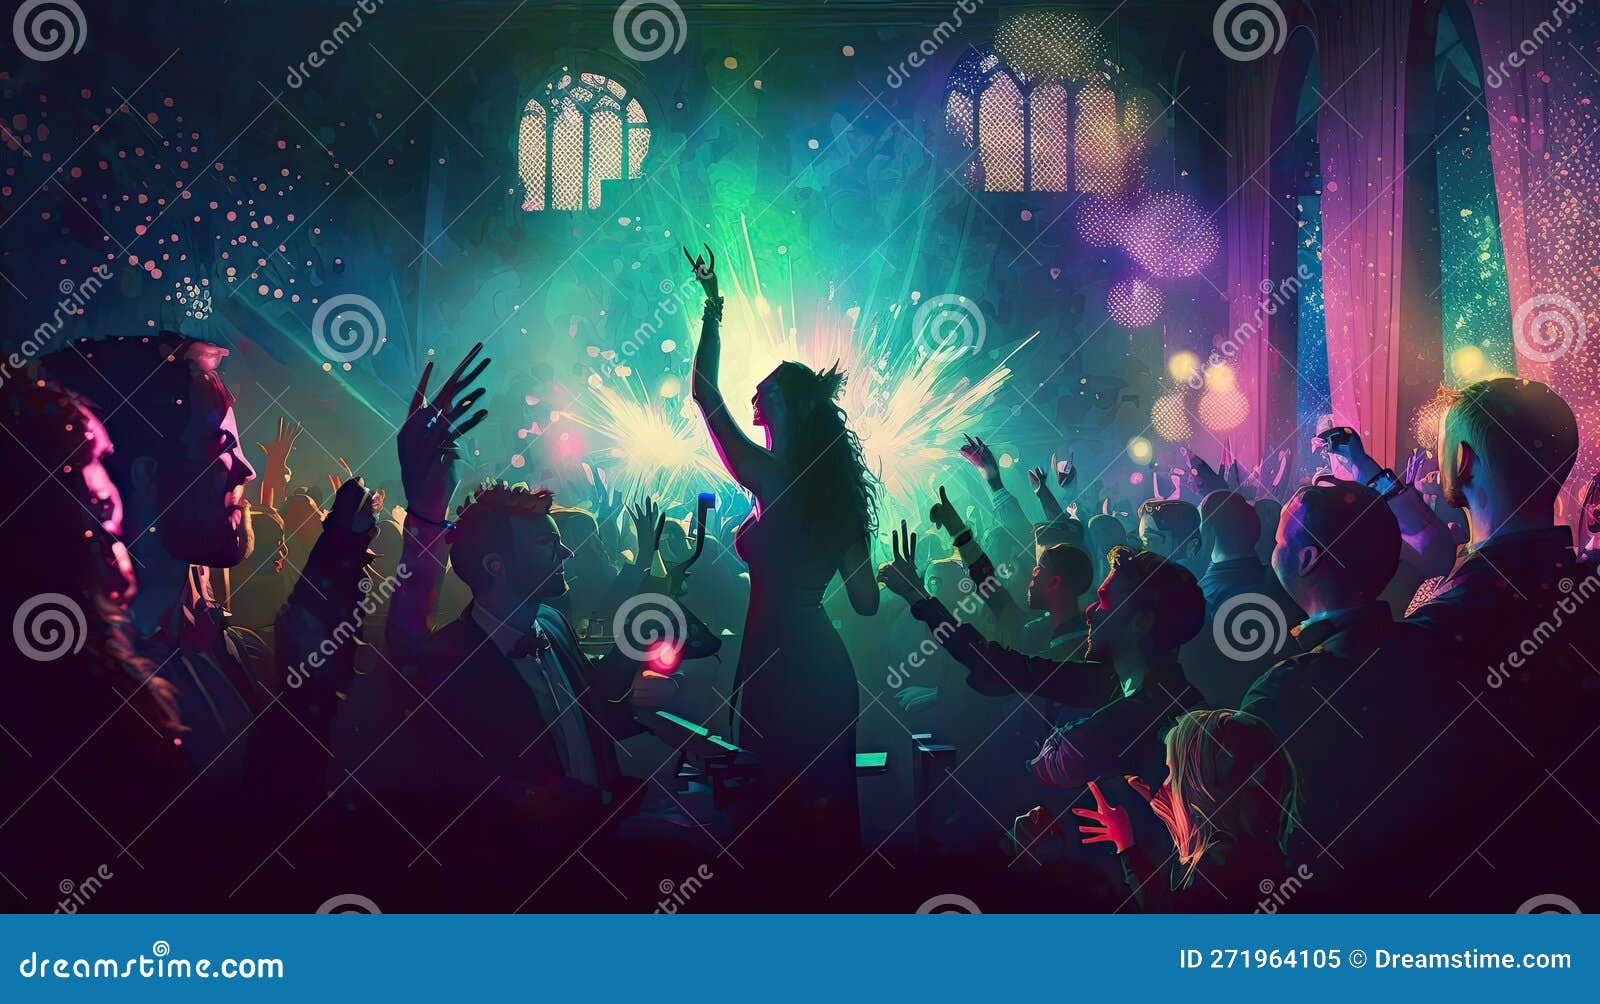 Euphoric Celebration of Life with Partygoers in a Vibrant Nightclub on ...